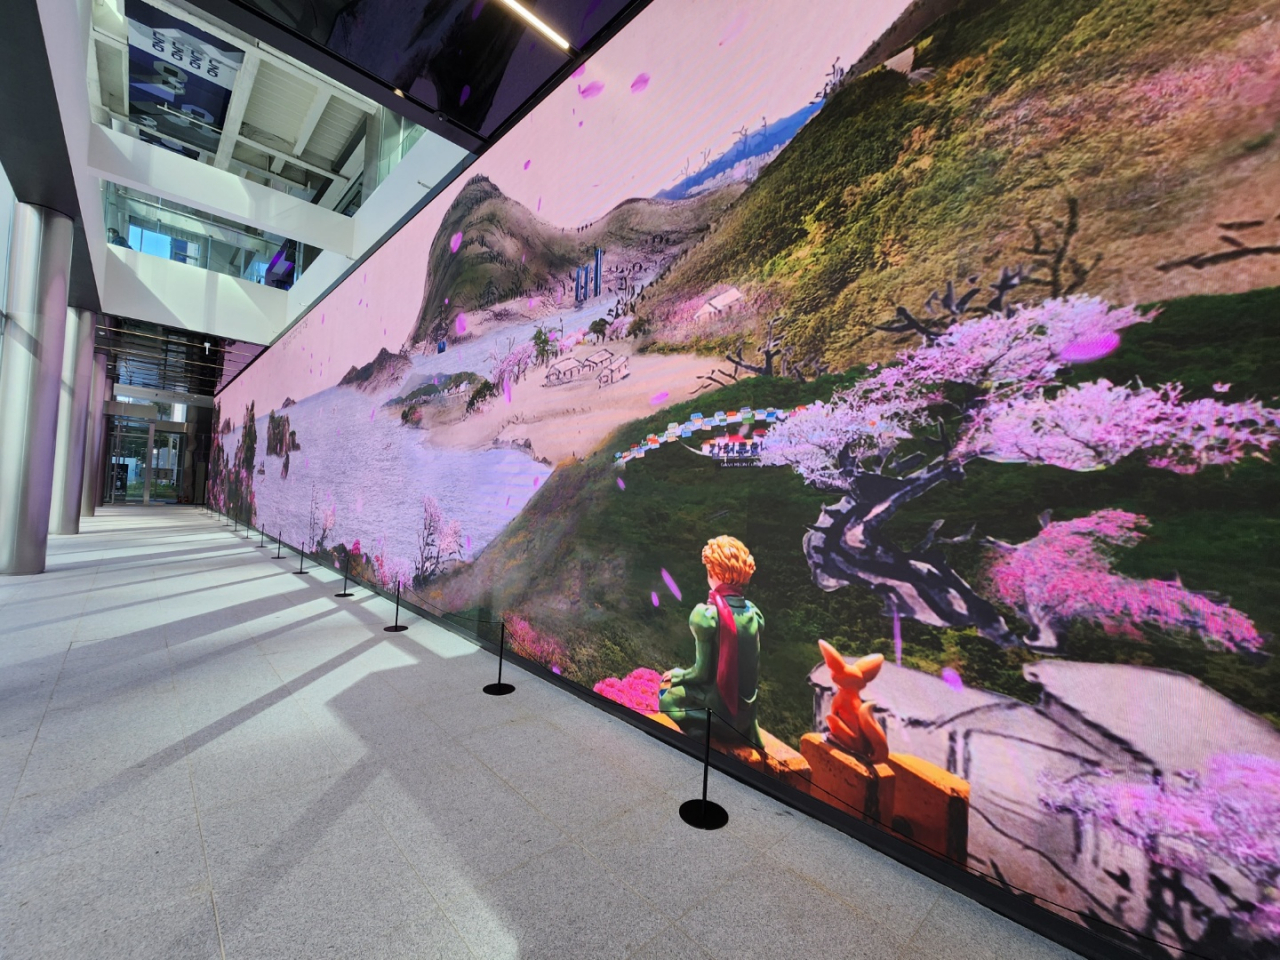 A 31-meter-wide display shows images and videos of must-visit tourist spots in Korea, greeting visitors on the first floor of the HiKR Ground tourism center. (Choi Jae-hee/The Korea Herald)